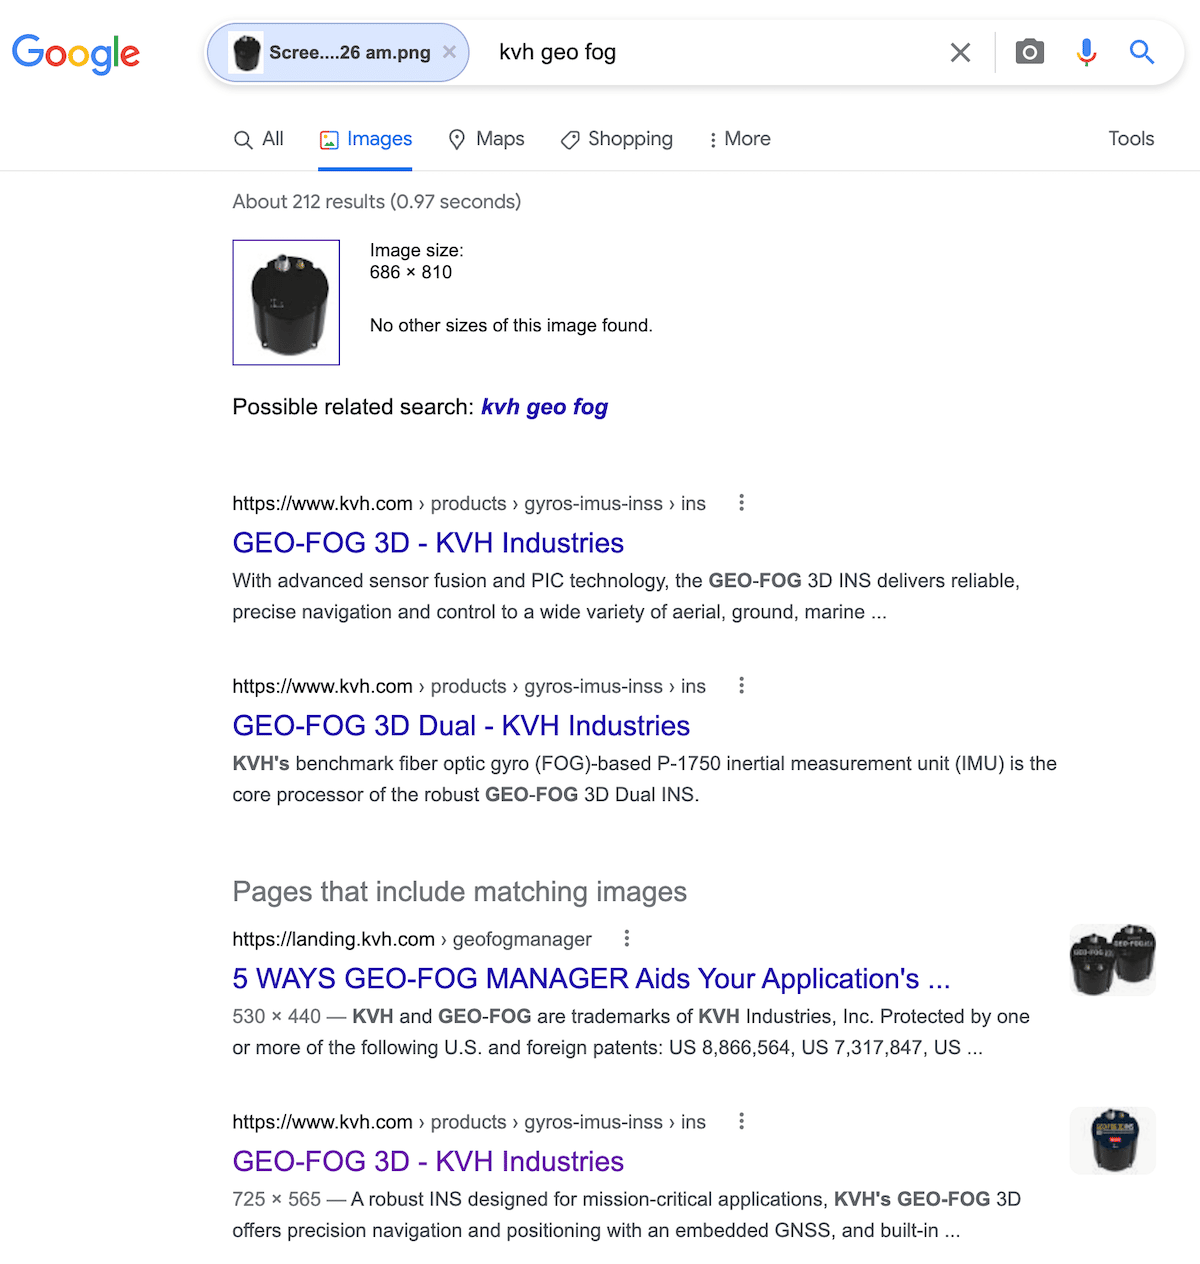 Google search results for the sensor Chris DeHaemer discussed in the presentation, which related to a FOG product made by KVH Industries.